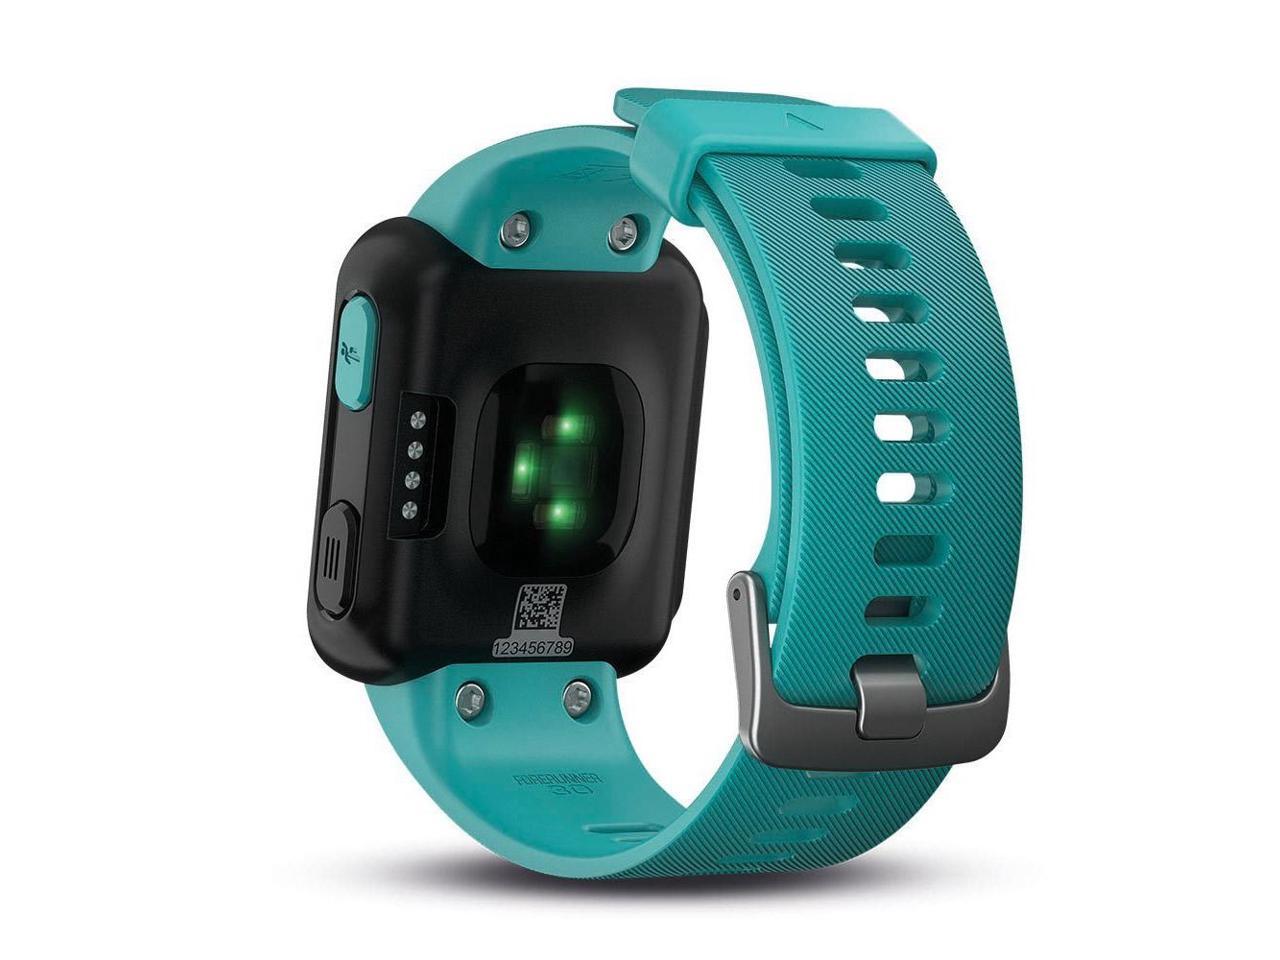 Garmin Forerunner 30 GPS Running Watch with Heart Rate - Turquoise